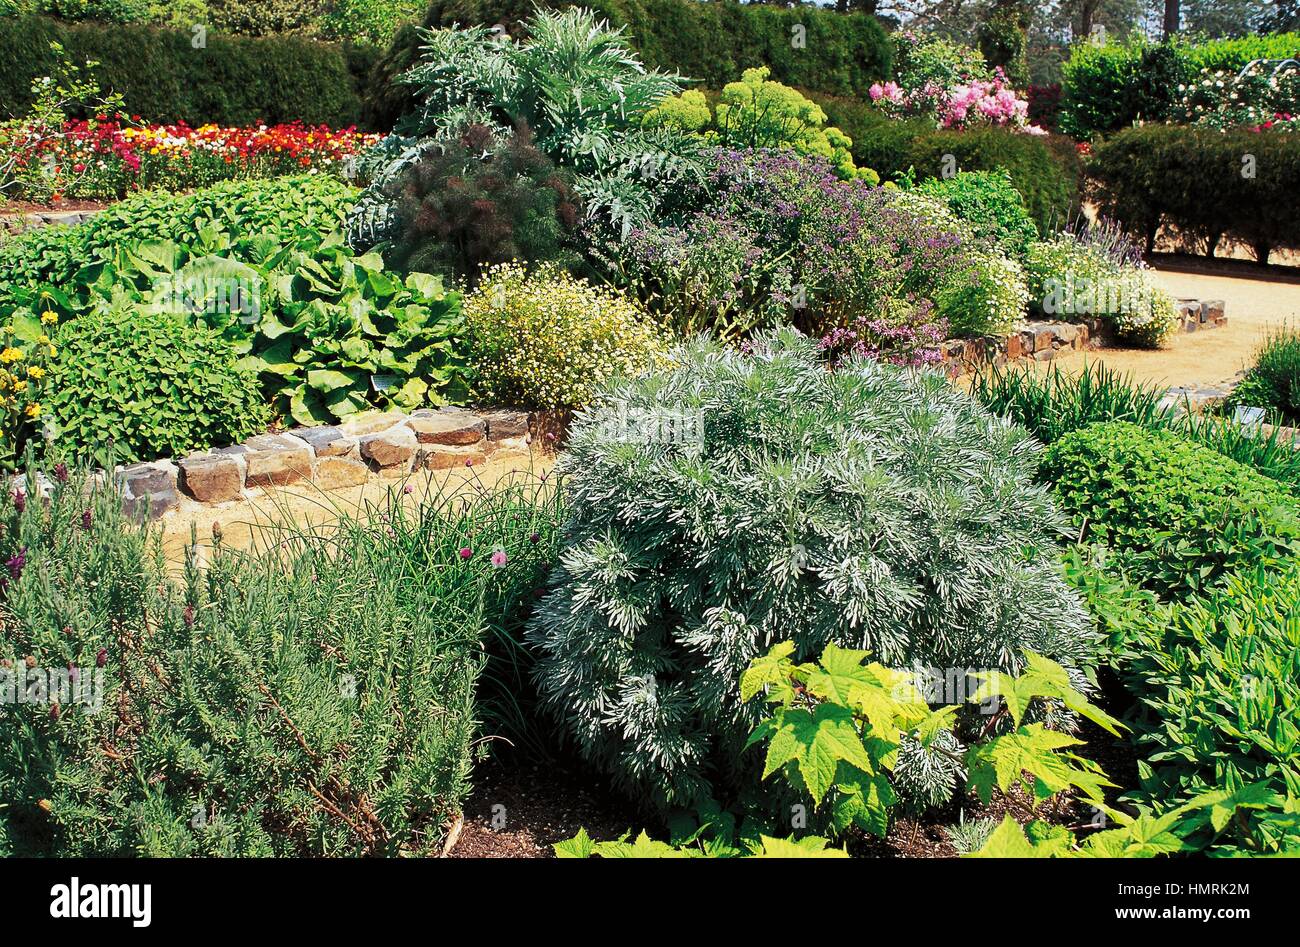 Garden with tree wormwood (Artemisia arborescens), Asteraceae and other plants. Stock Photo